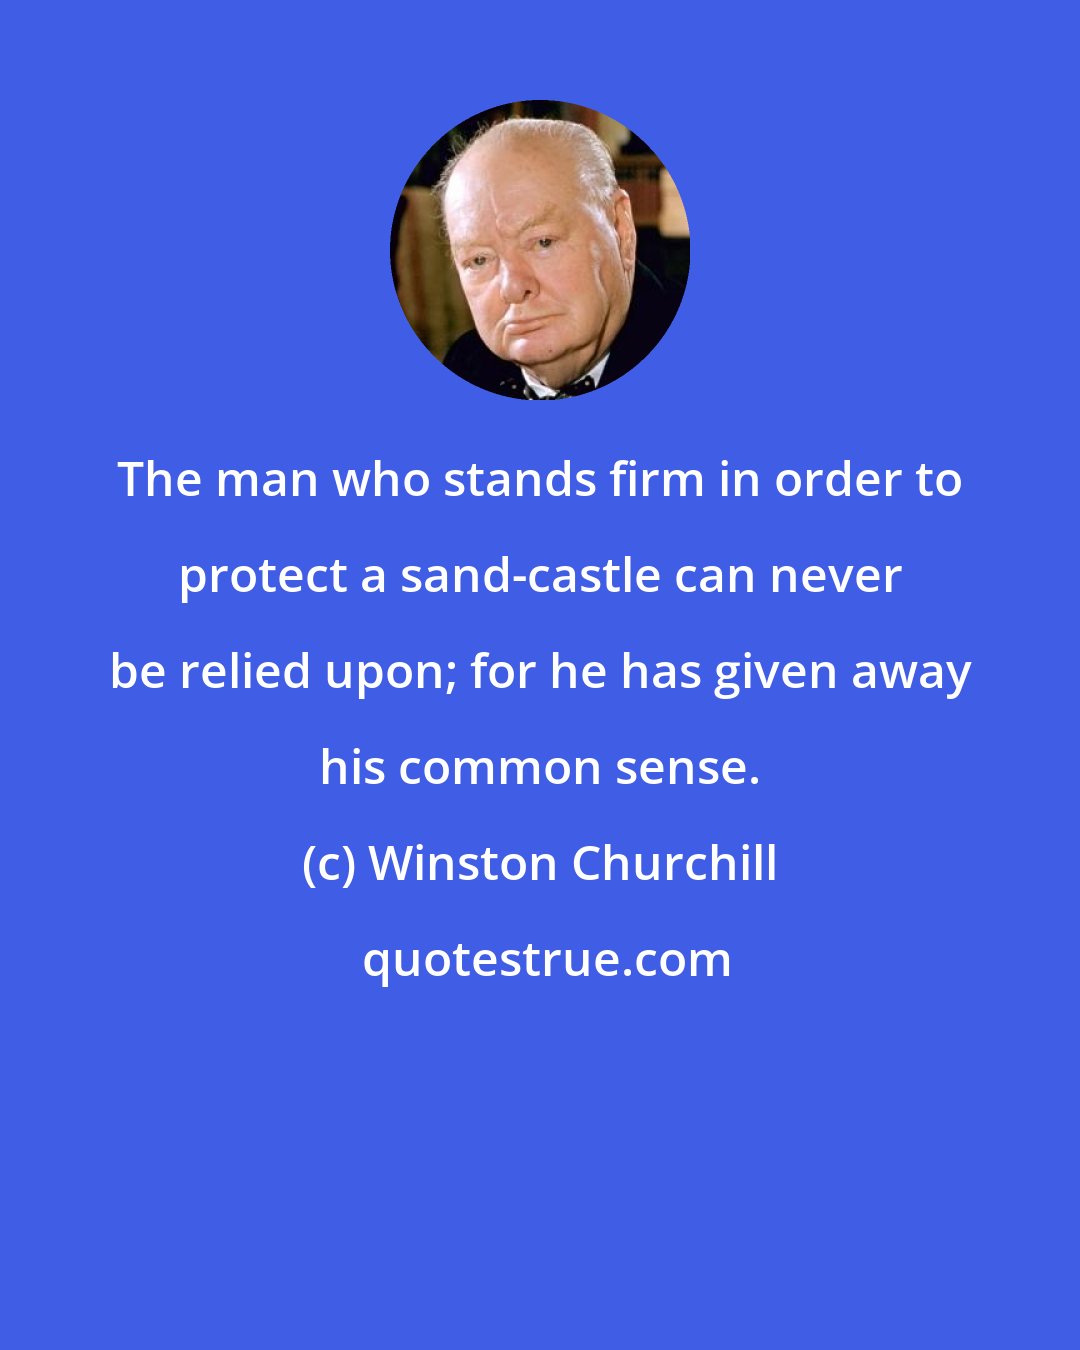 Winston Churchill: The man who stands firm in order to protect a sand-castle can never be relied upon; for he has given away his common sense.